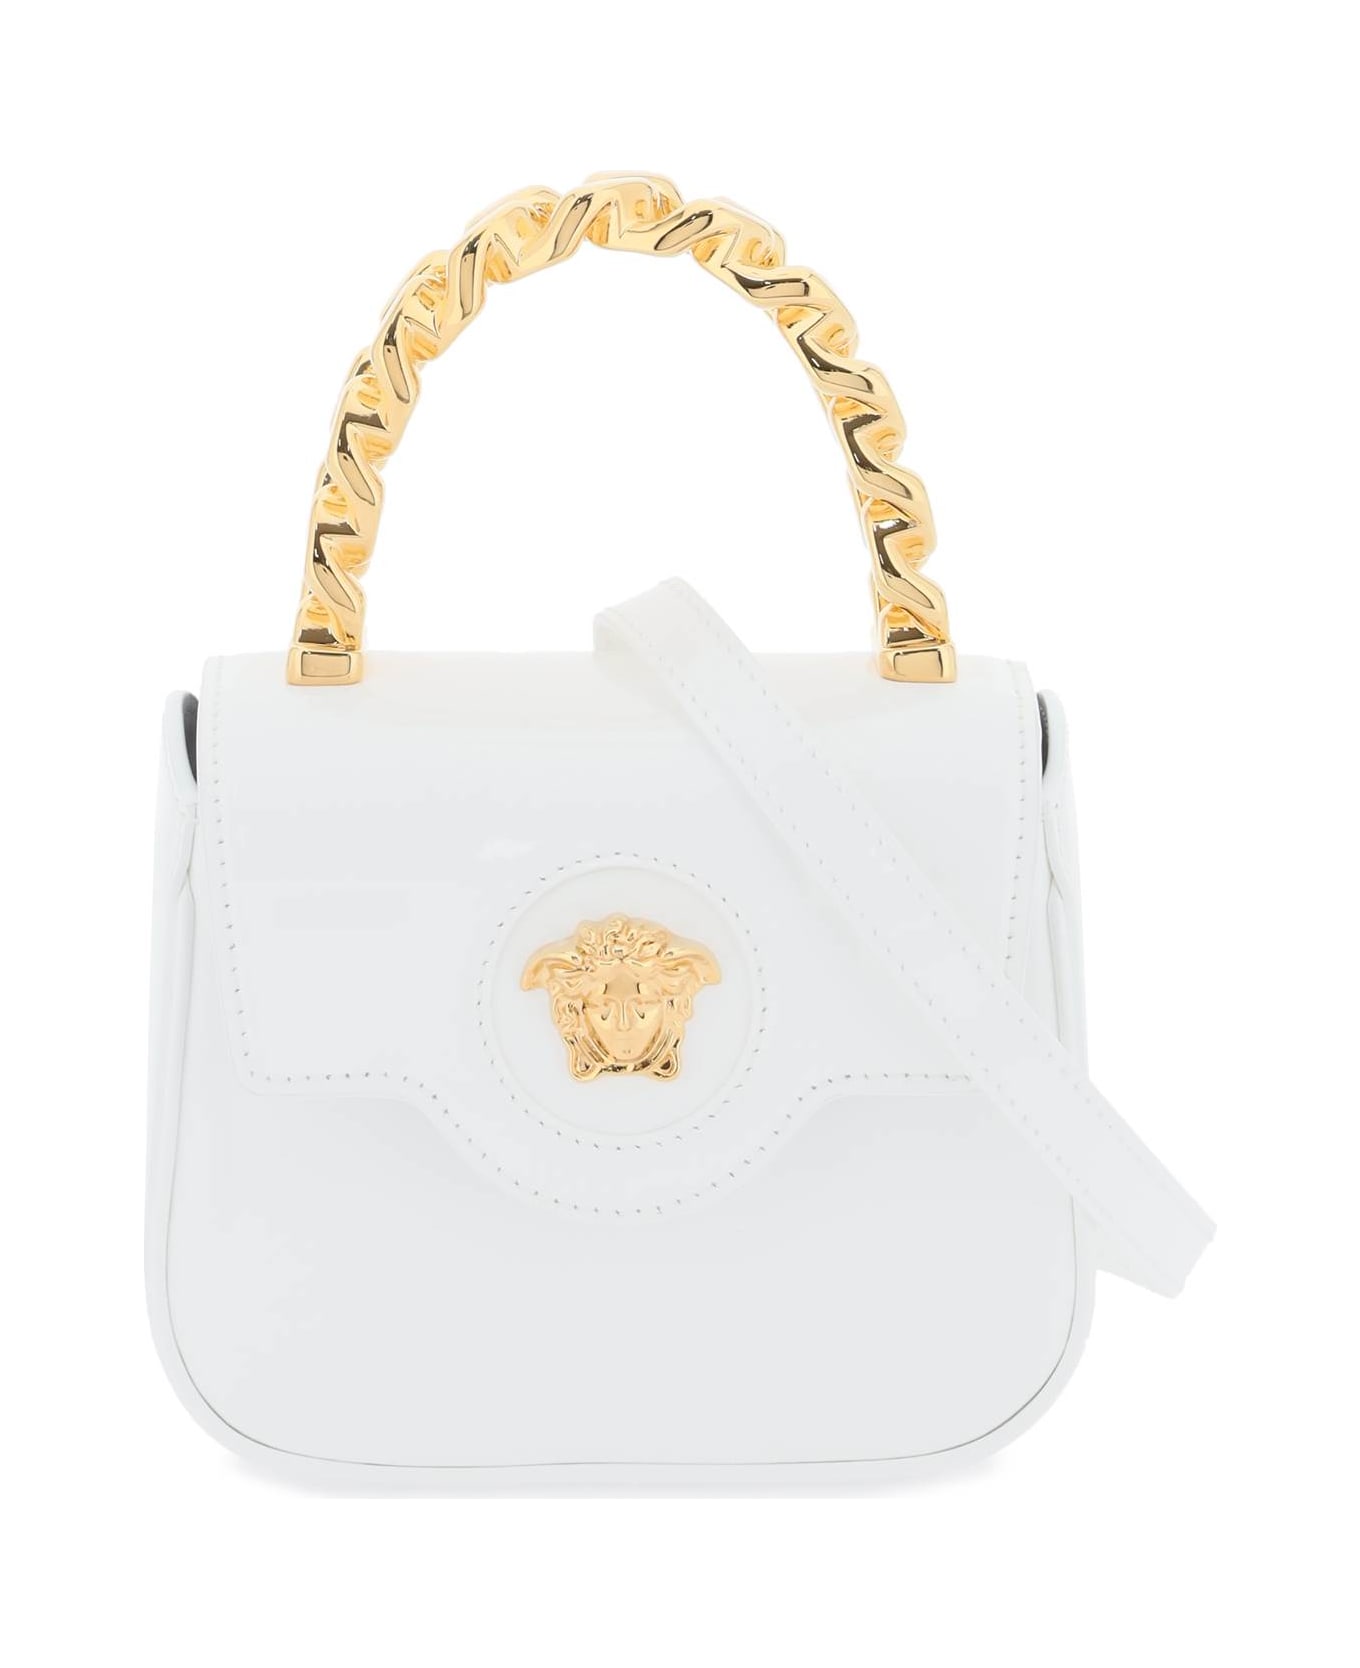 Versace White Patent Leather Bag - OPTICAL WHITE VERSACE GOL (White)